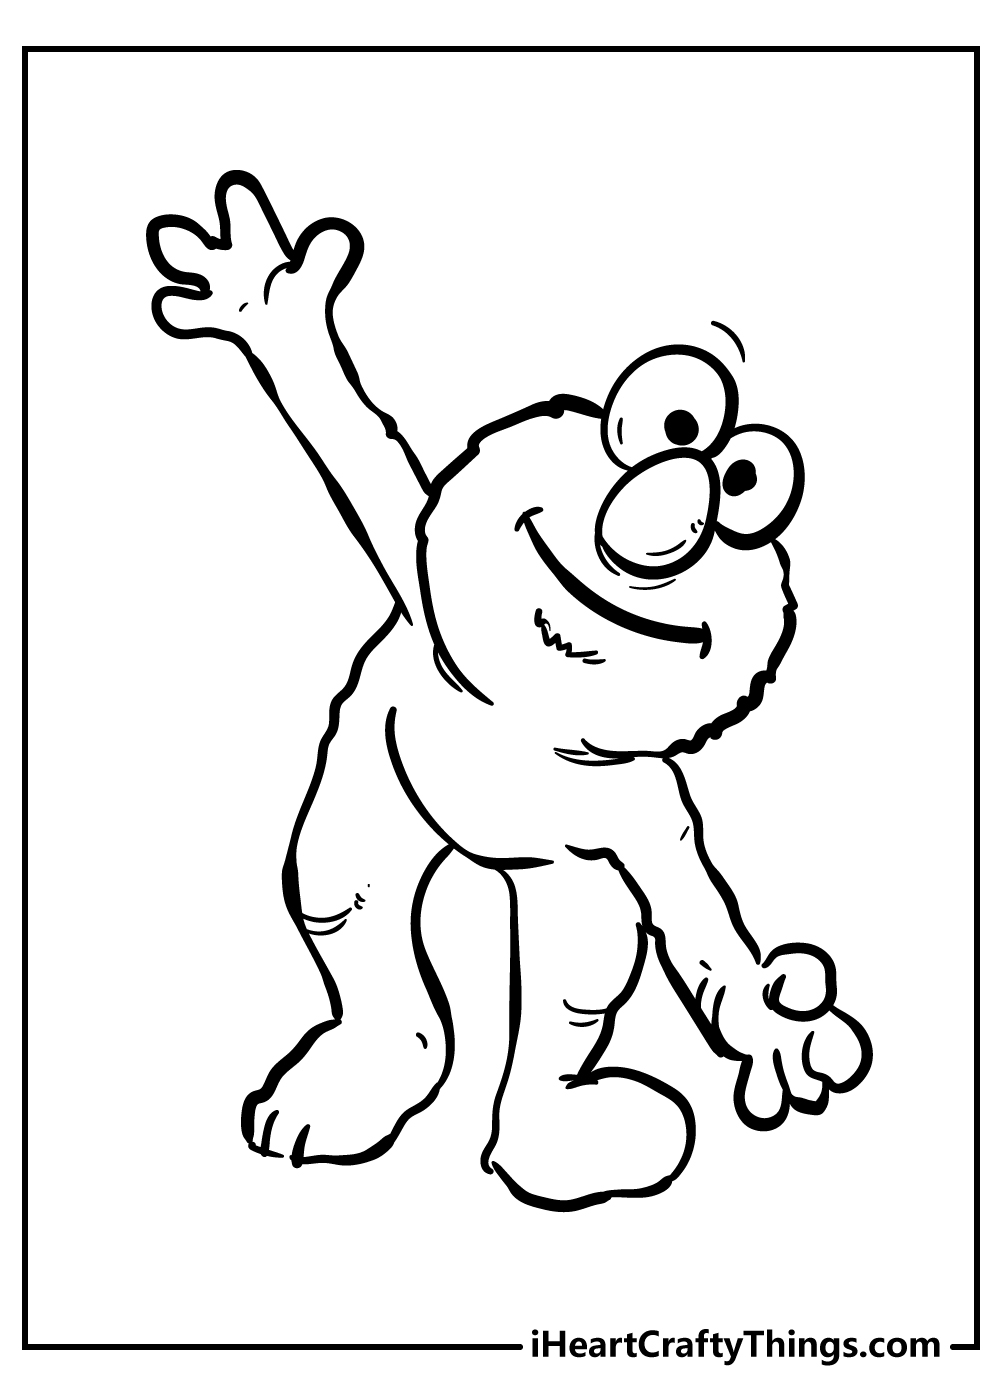 Elmo Coloring Pages for adults free printable